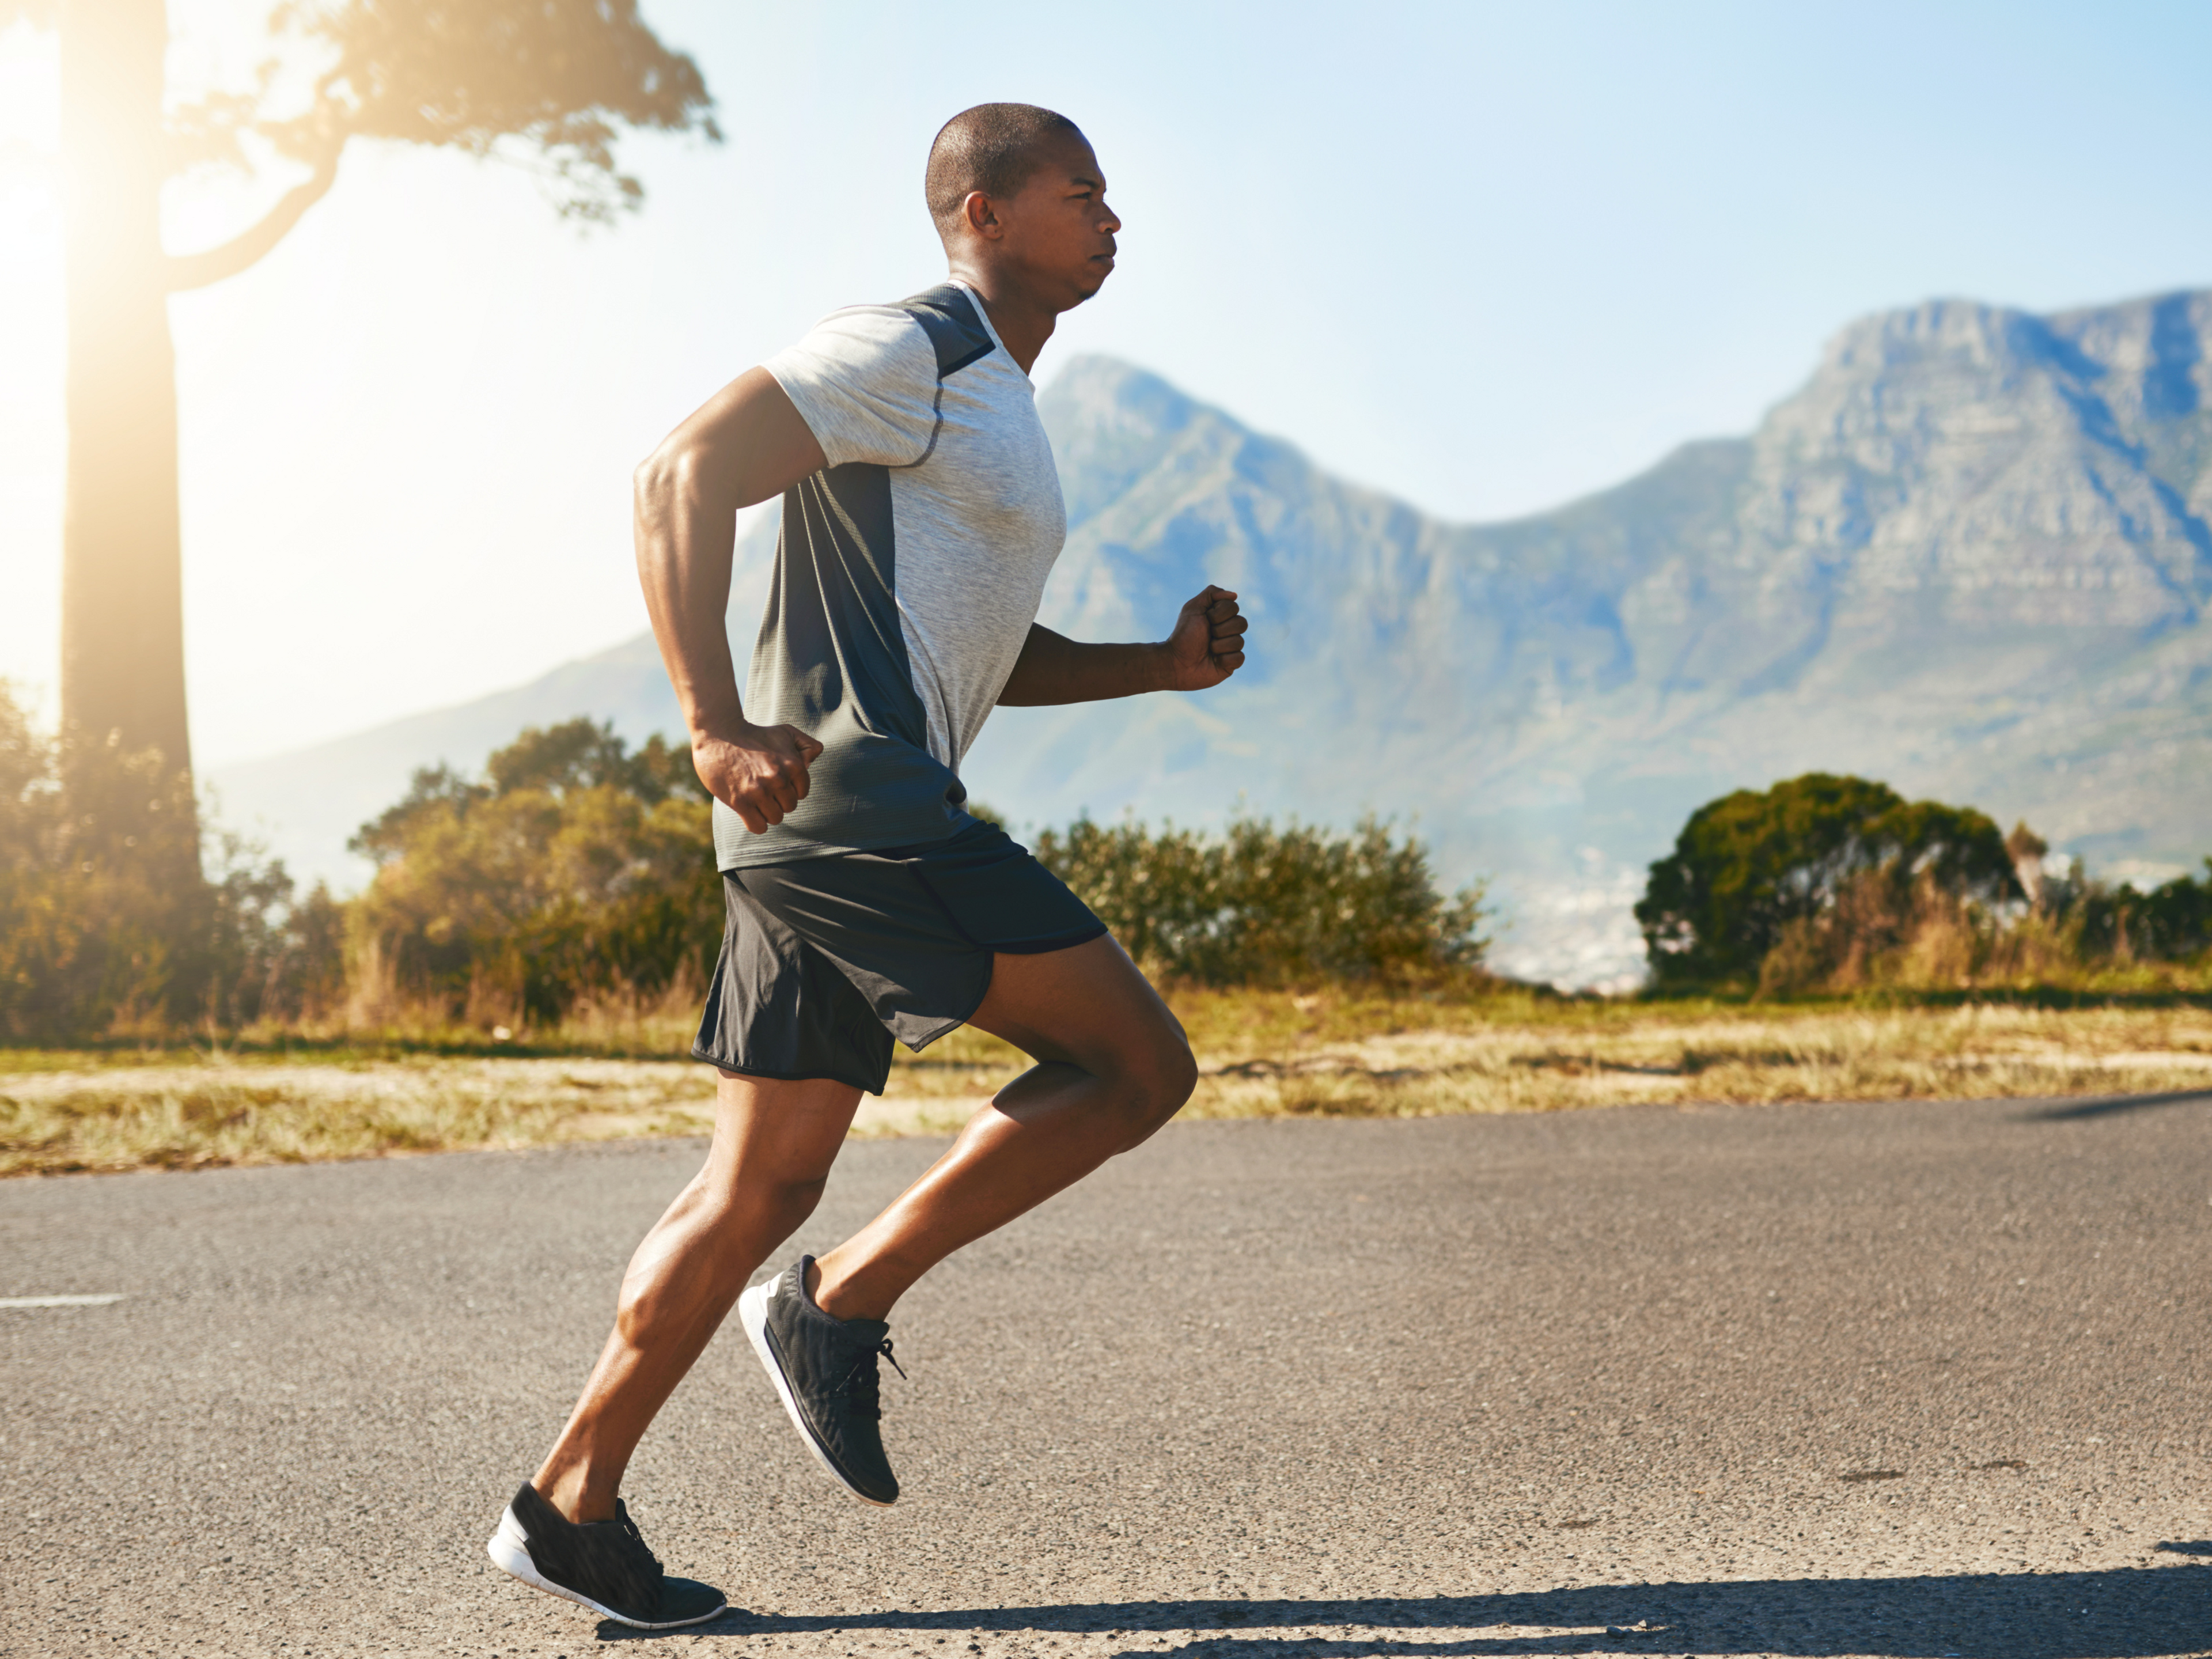 Man is trying to prevent overuse injuries running.